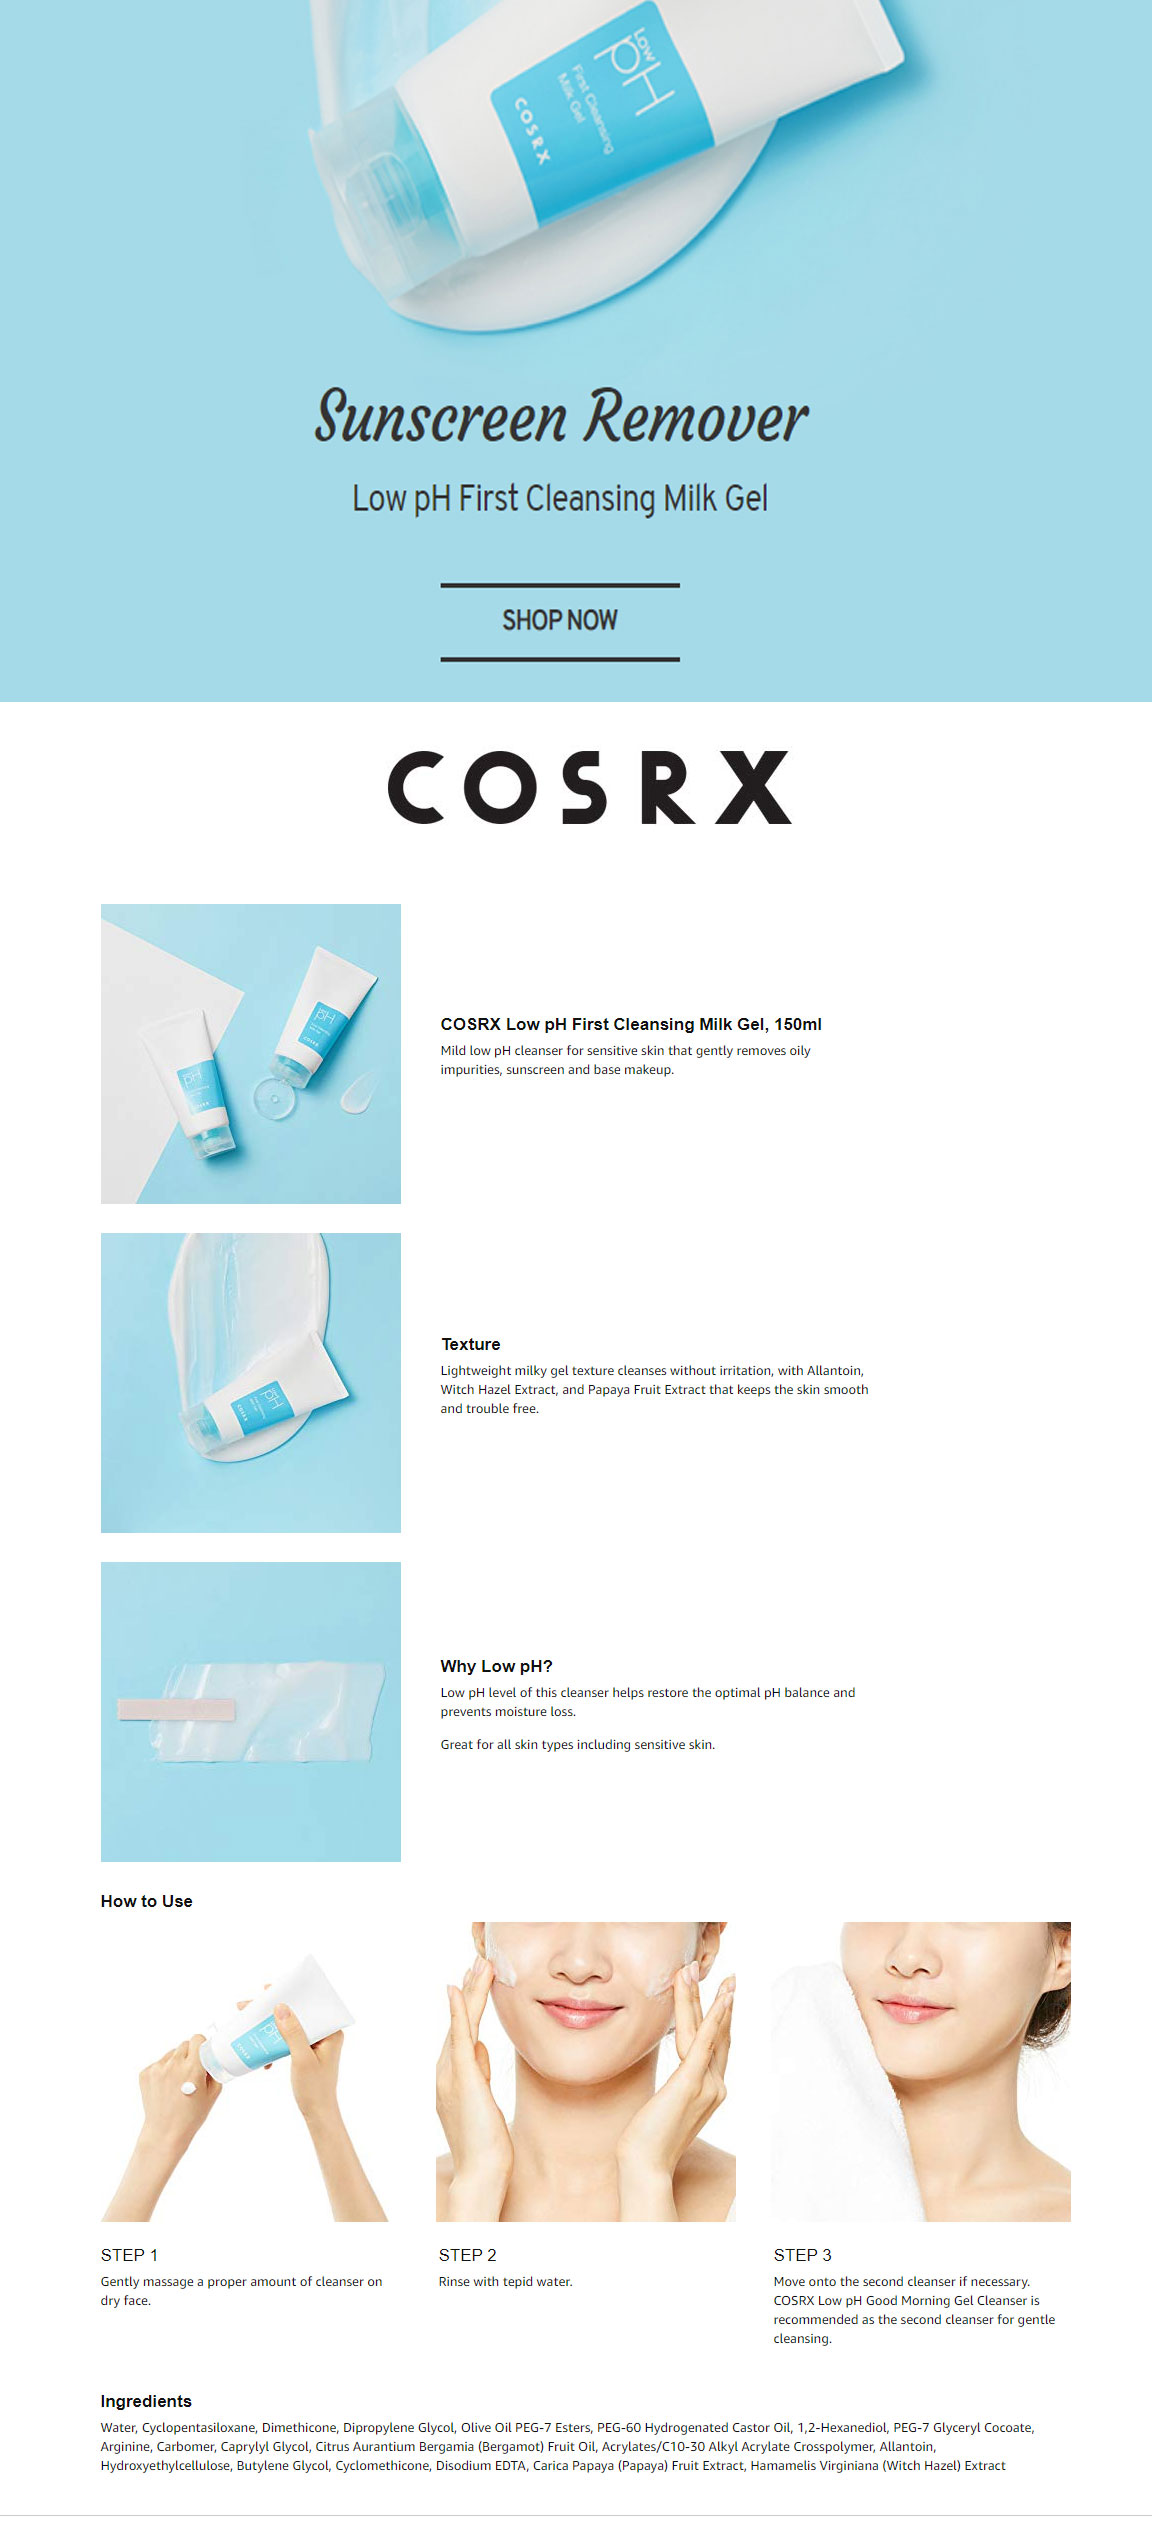 COSRX Low pH First Cleansing Milk Gel, 150ml - Sunscreen Remover from Shopandshop